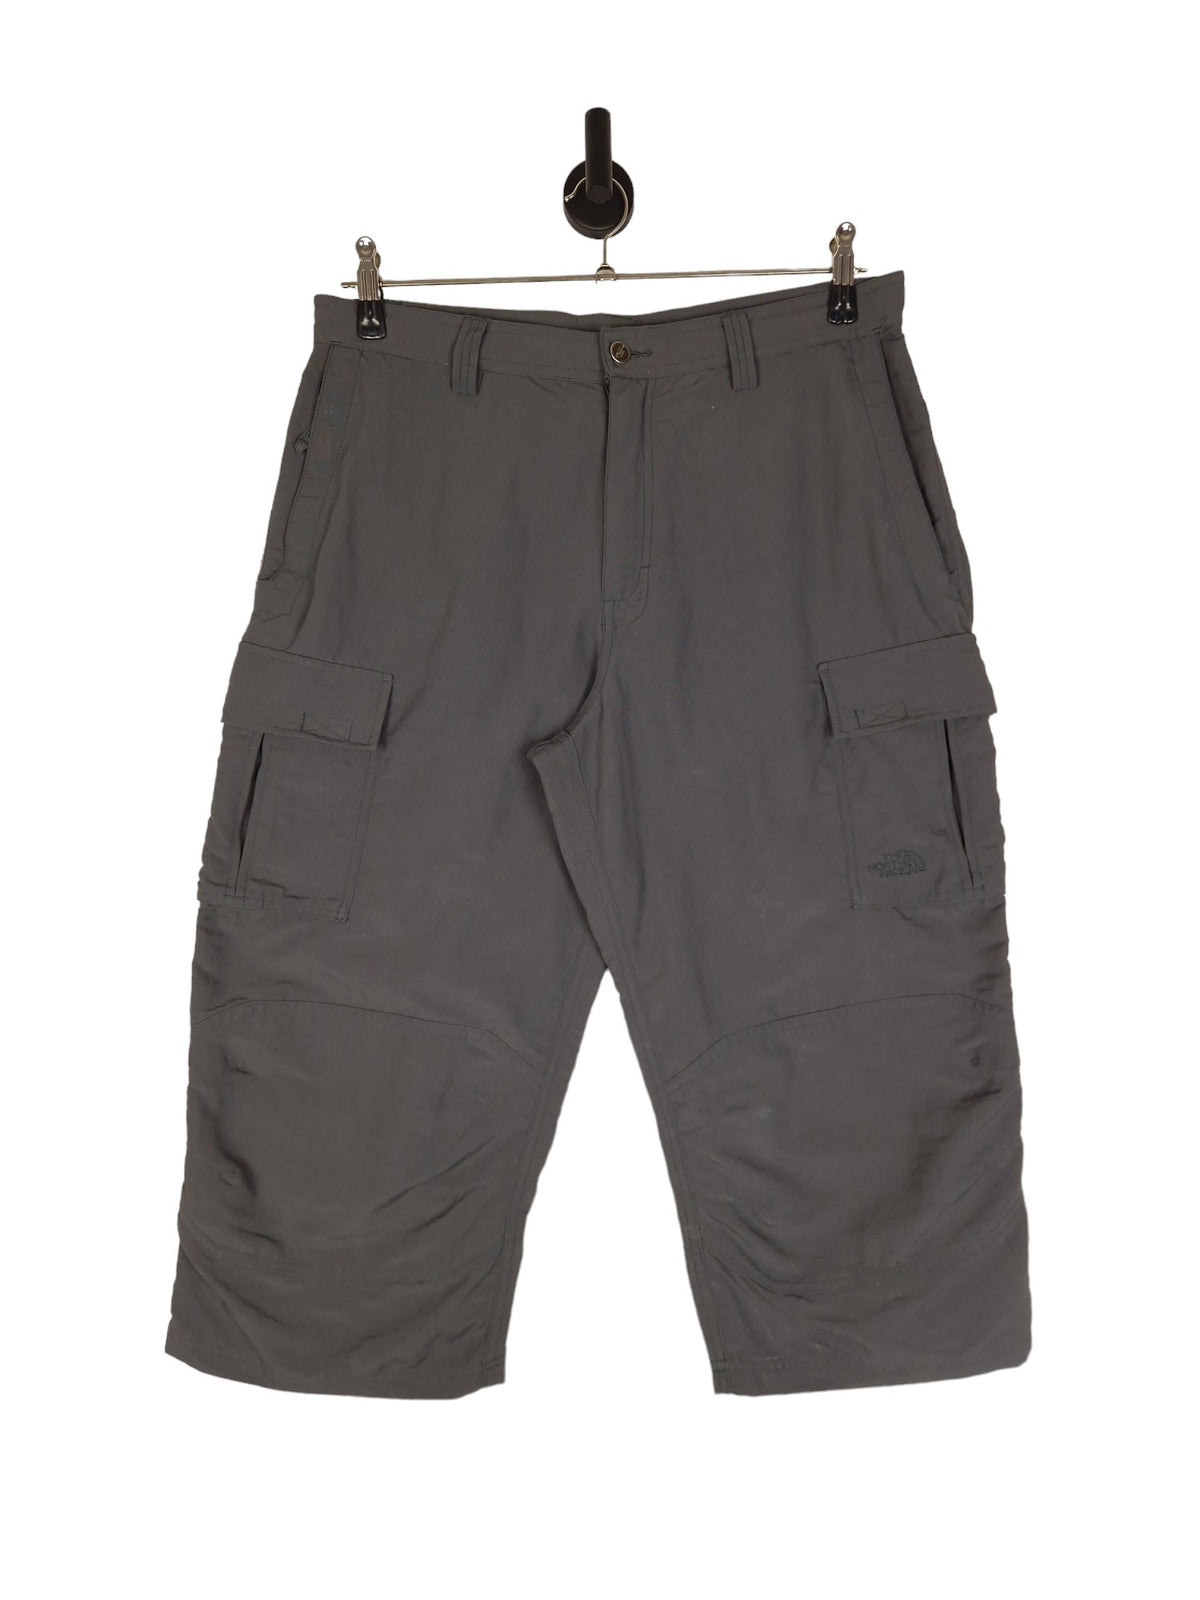 The North Face 3/4 Cargo Shorts  - Size 36